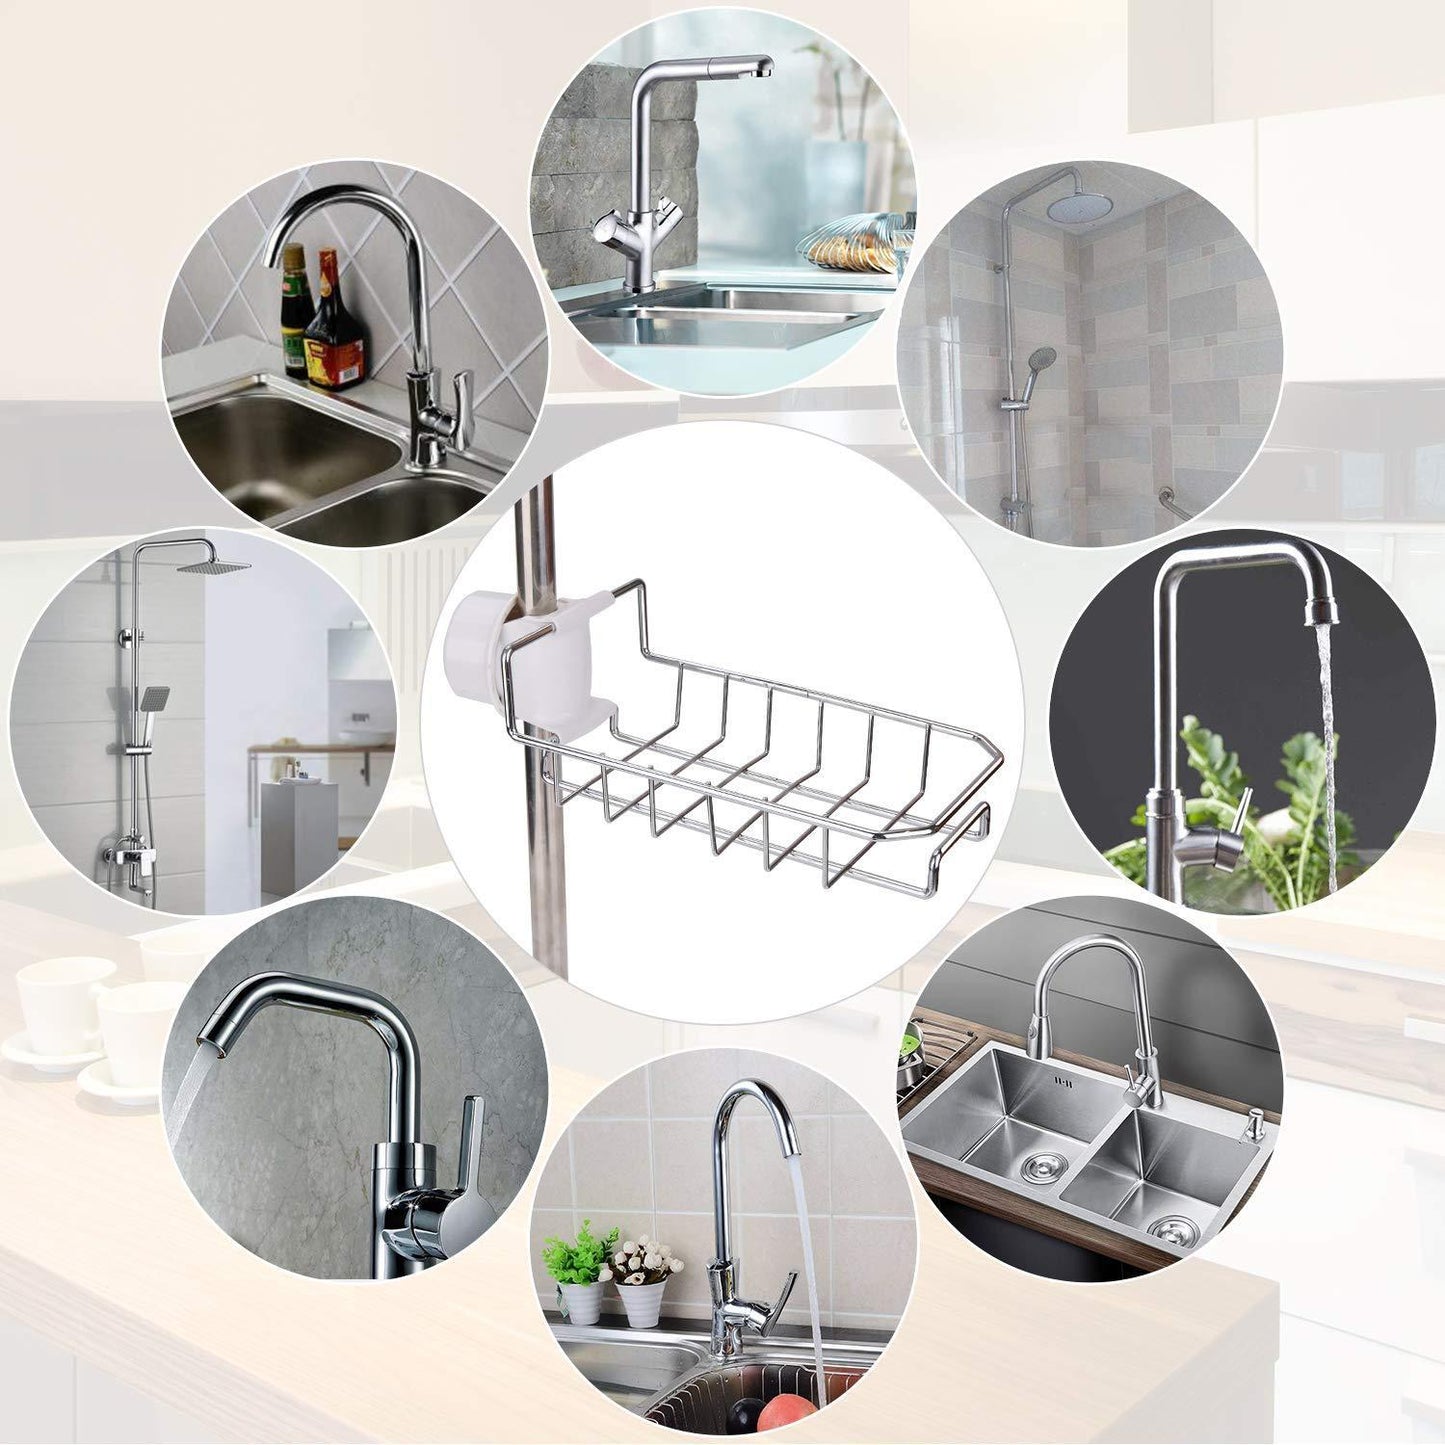 Discover leefe 2pcs kitchen faucet sponge holder stainless steel storage rack hanging sink caddy organizer for scrubbers soap bathroom detachable no suction cup or magnet no drilling